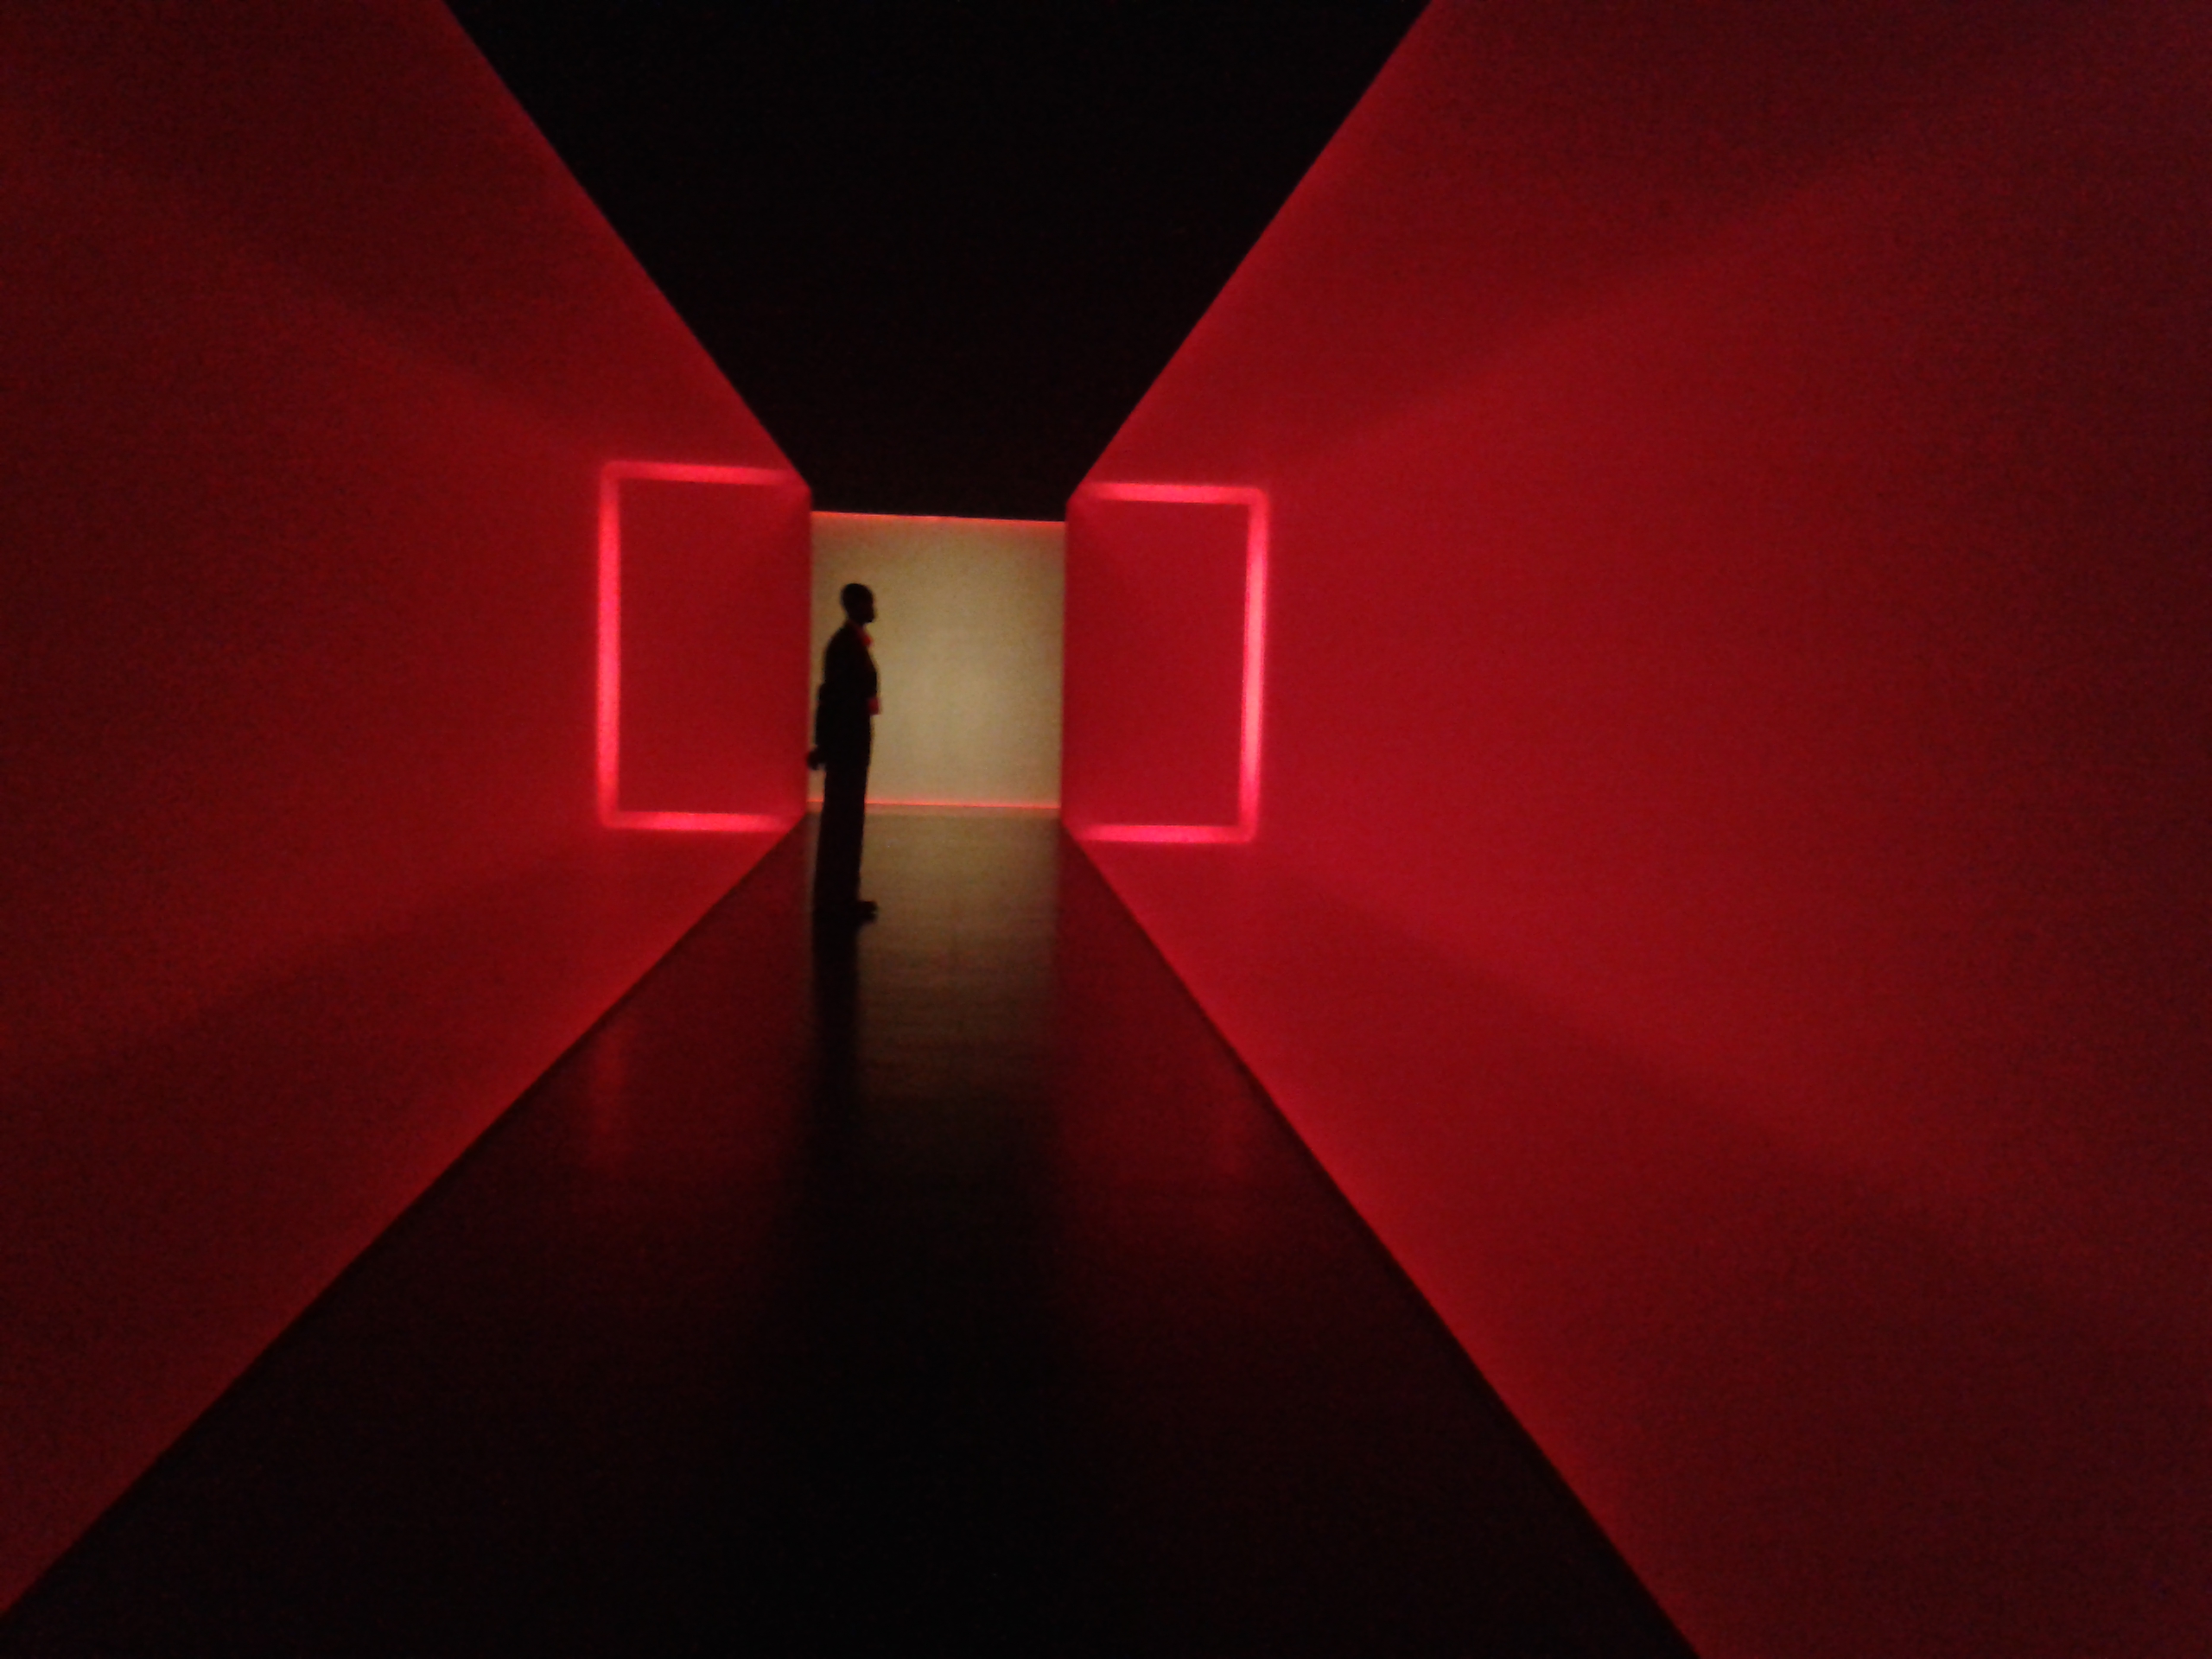 Turrell's The Light Inside at The Museum of Fine Arts, Houston (CC-BY 4.0 International, Beck Pitt)